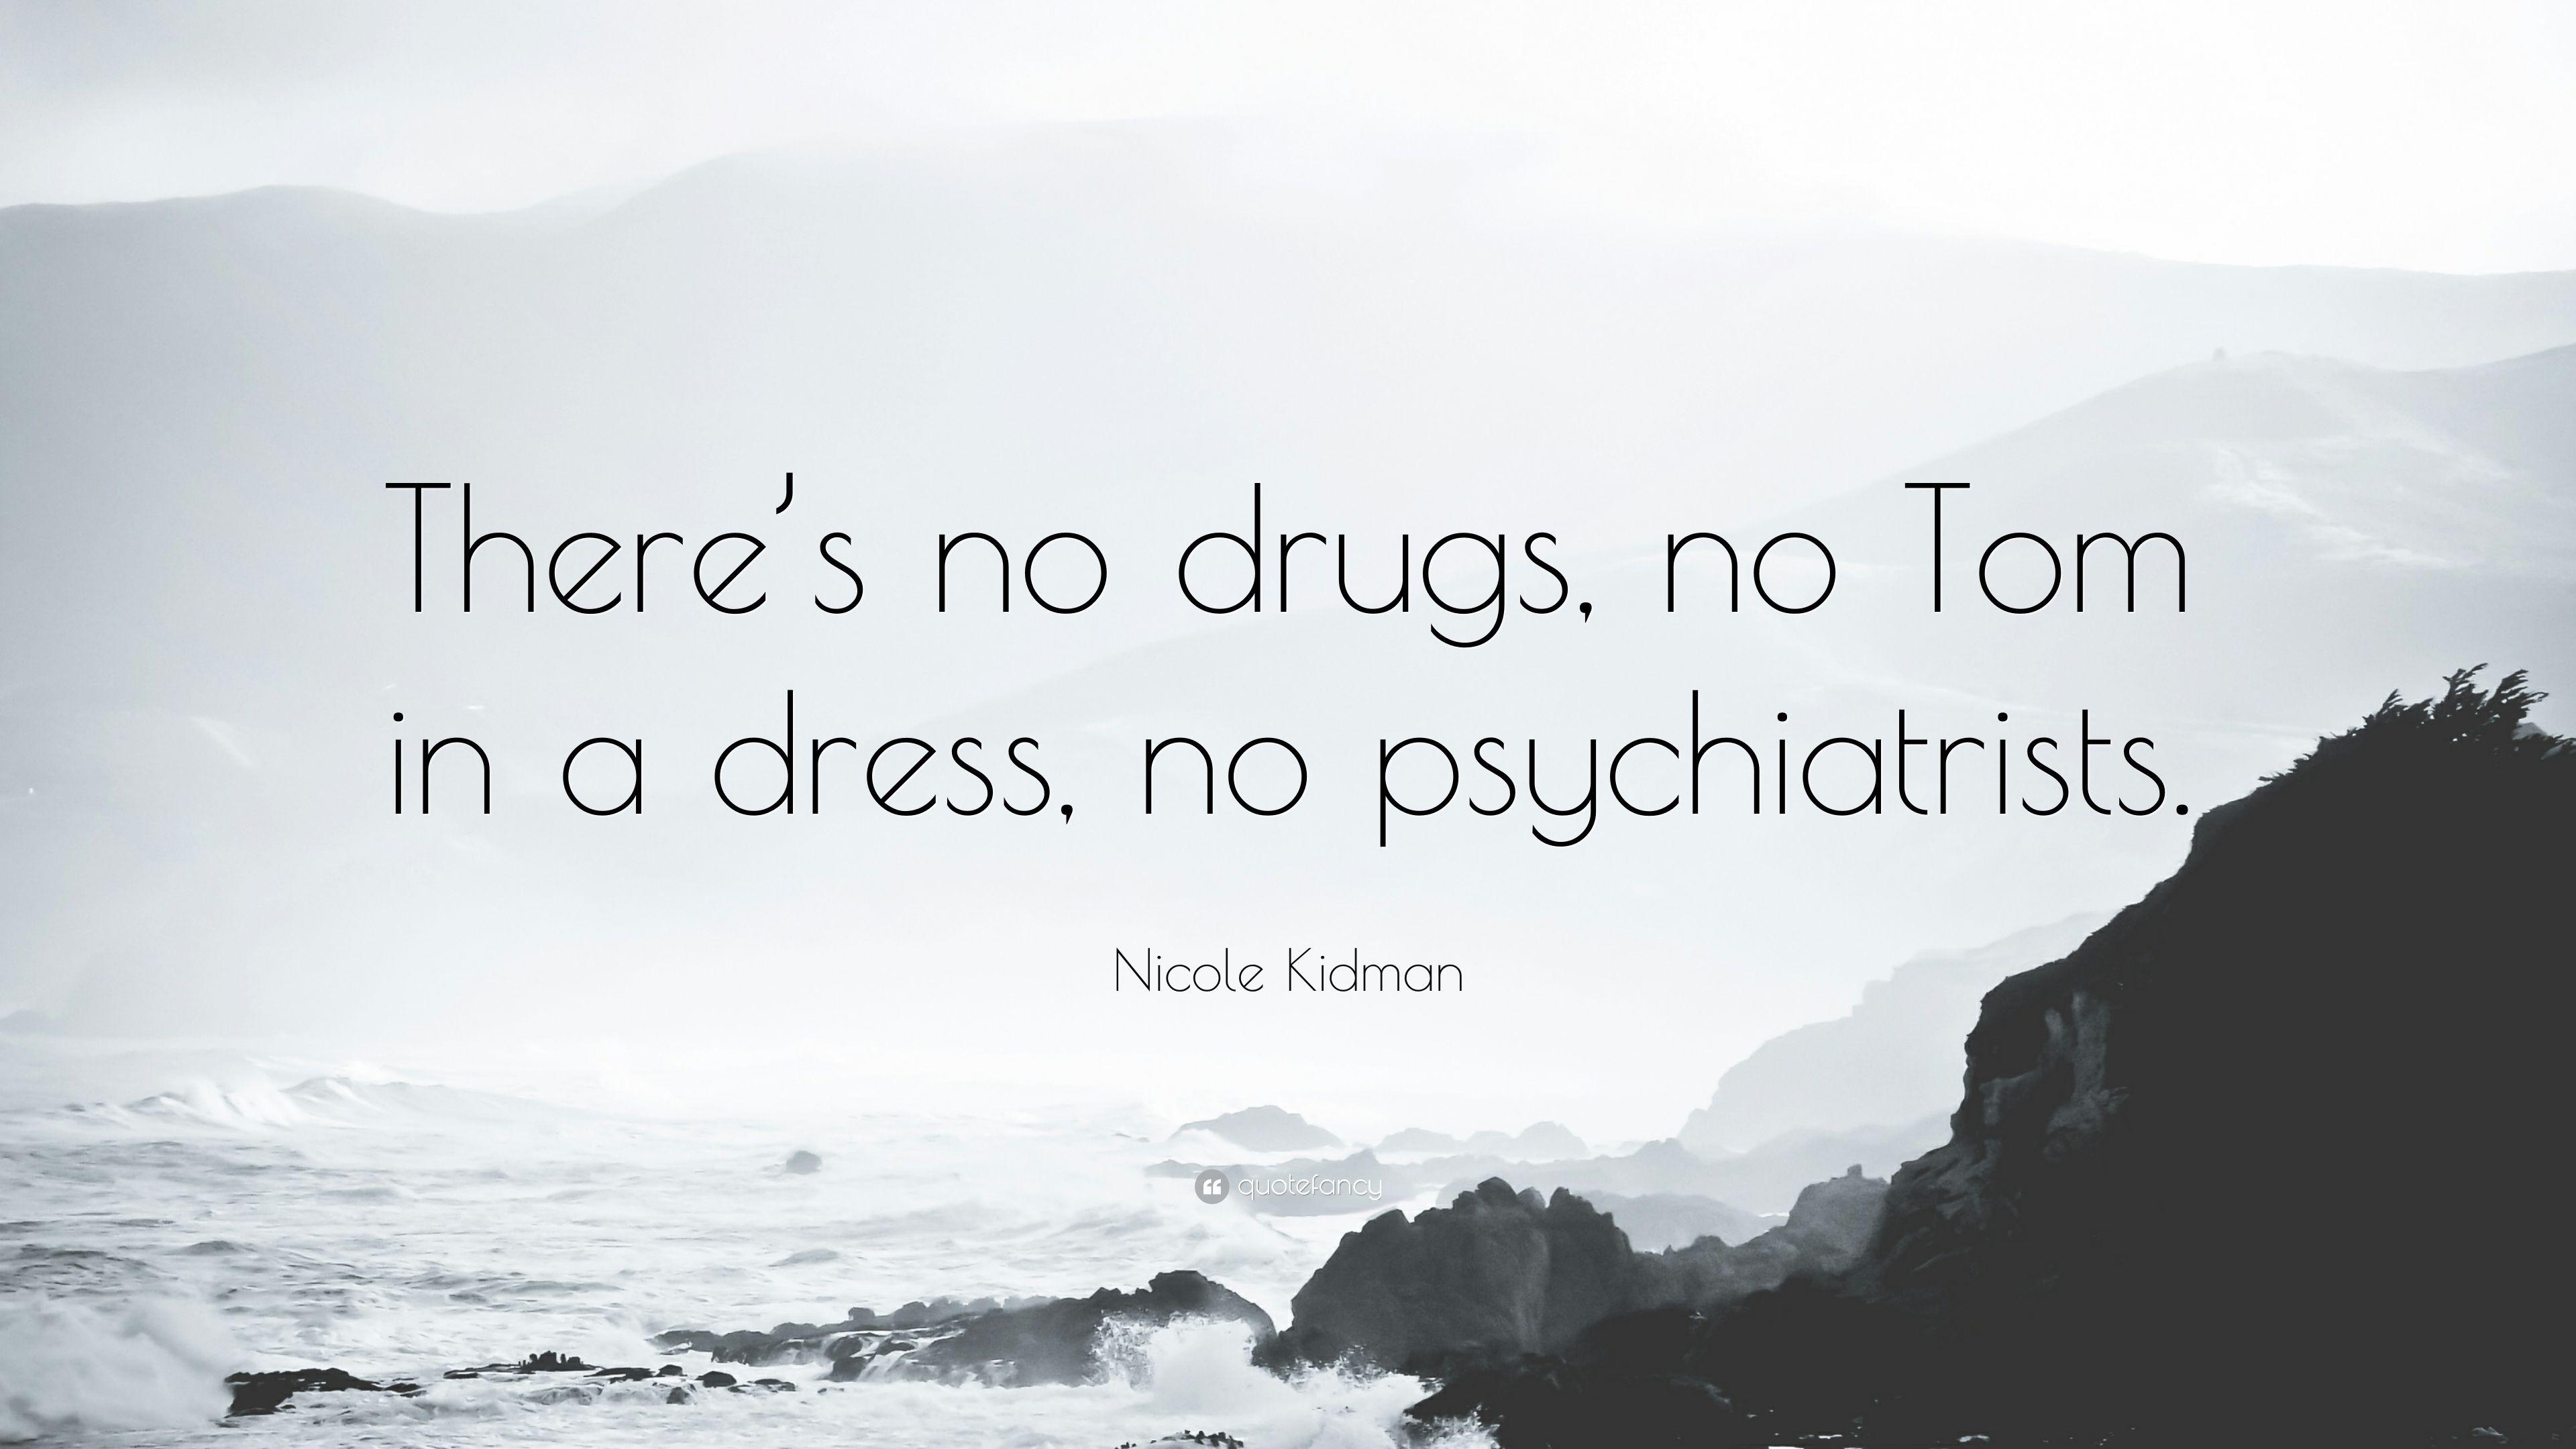 Nicole Kidman Quote: “There's no drugs, no Tom in a dress, no